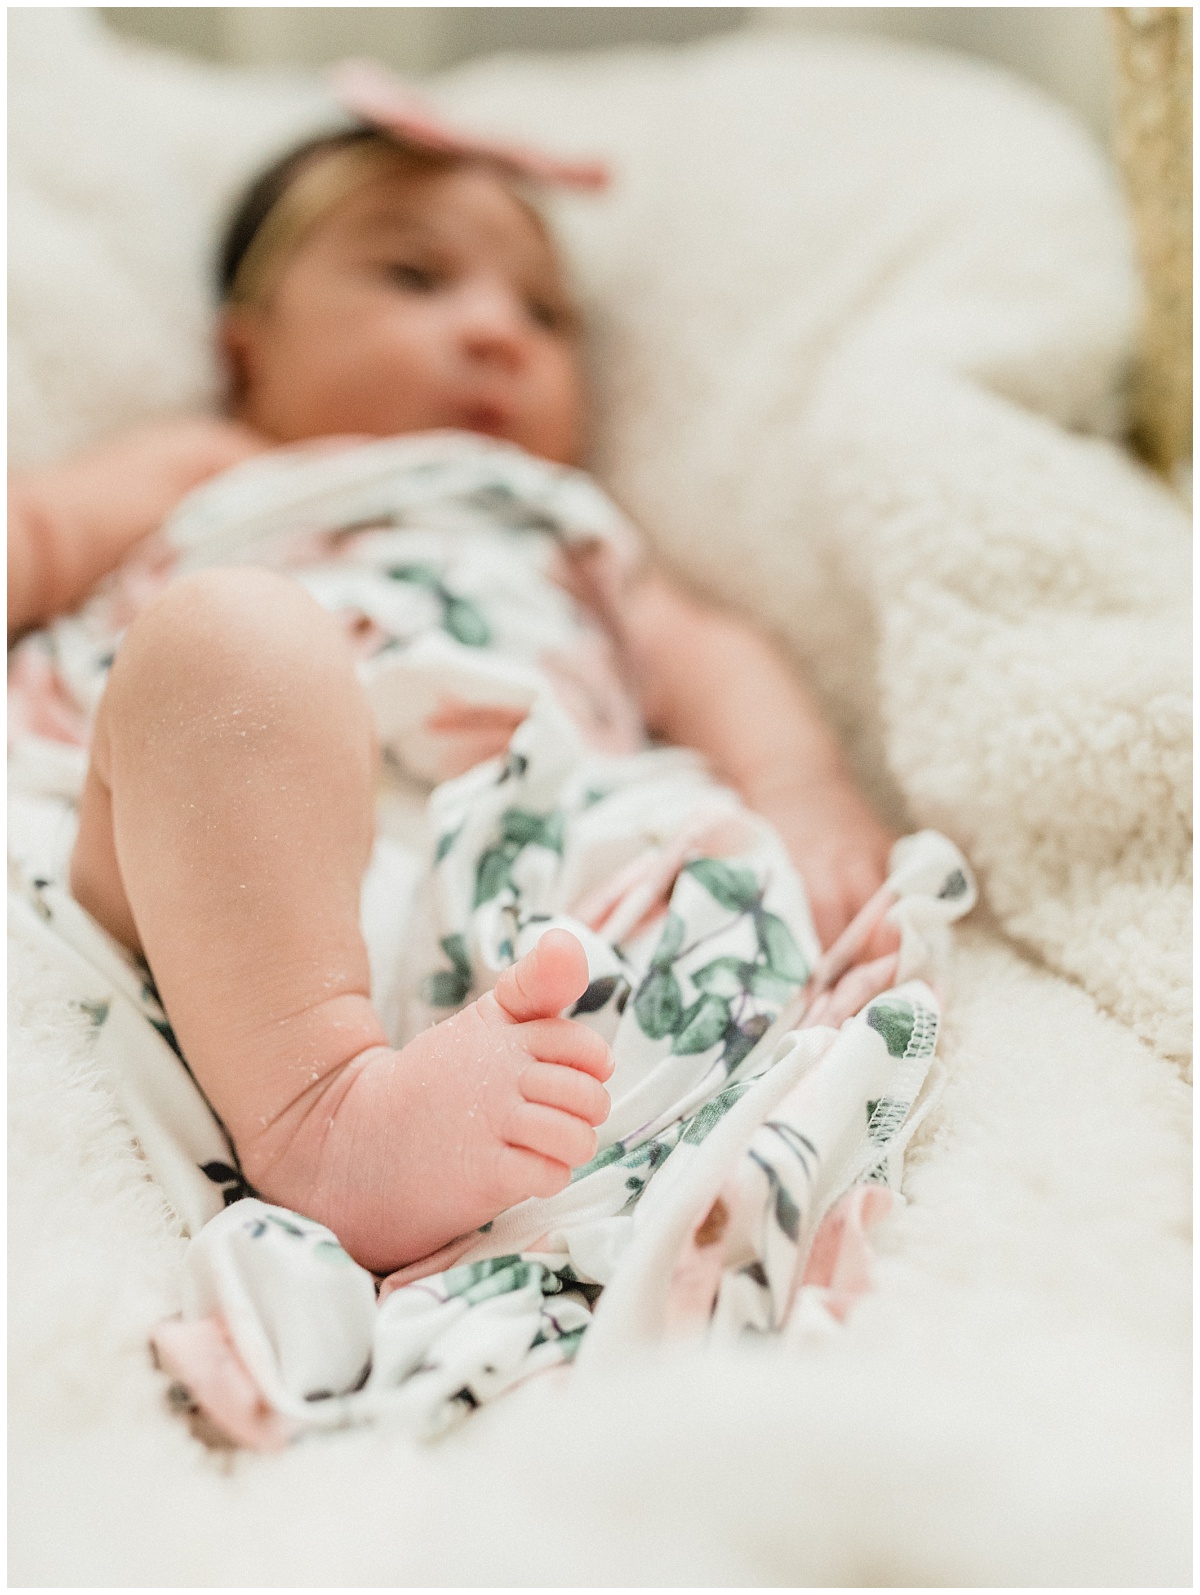 Newborn and her toes